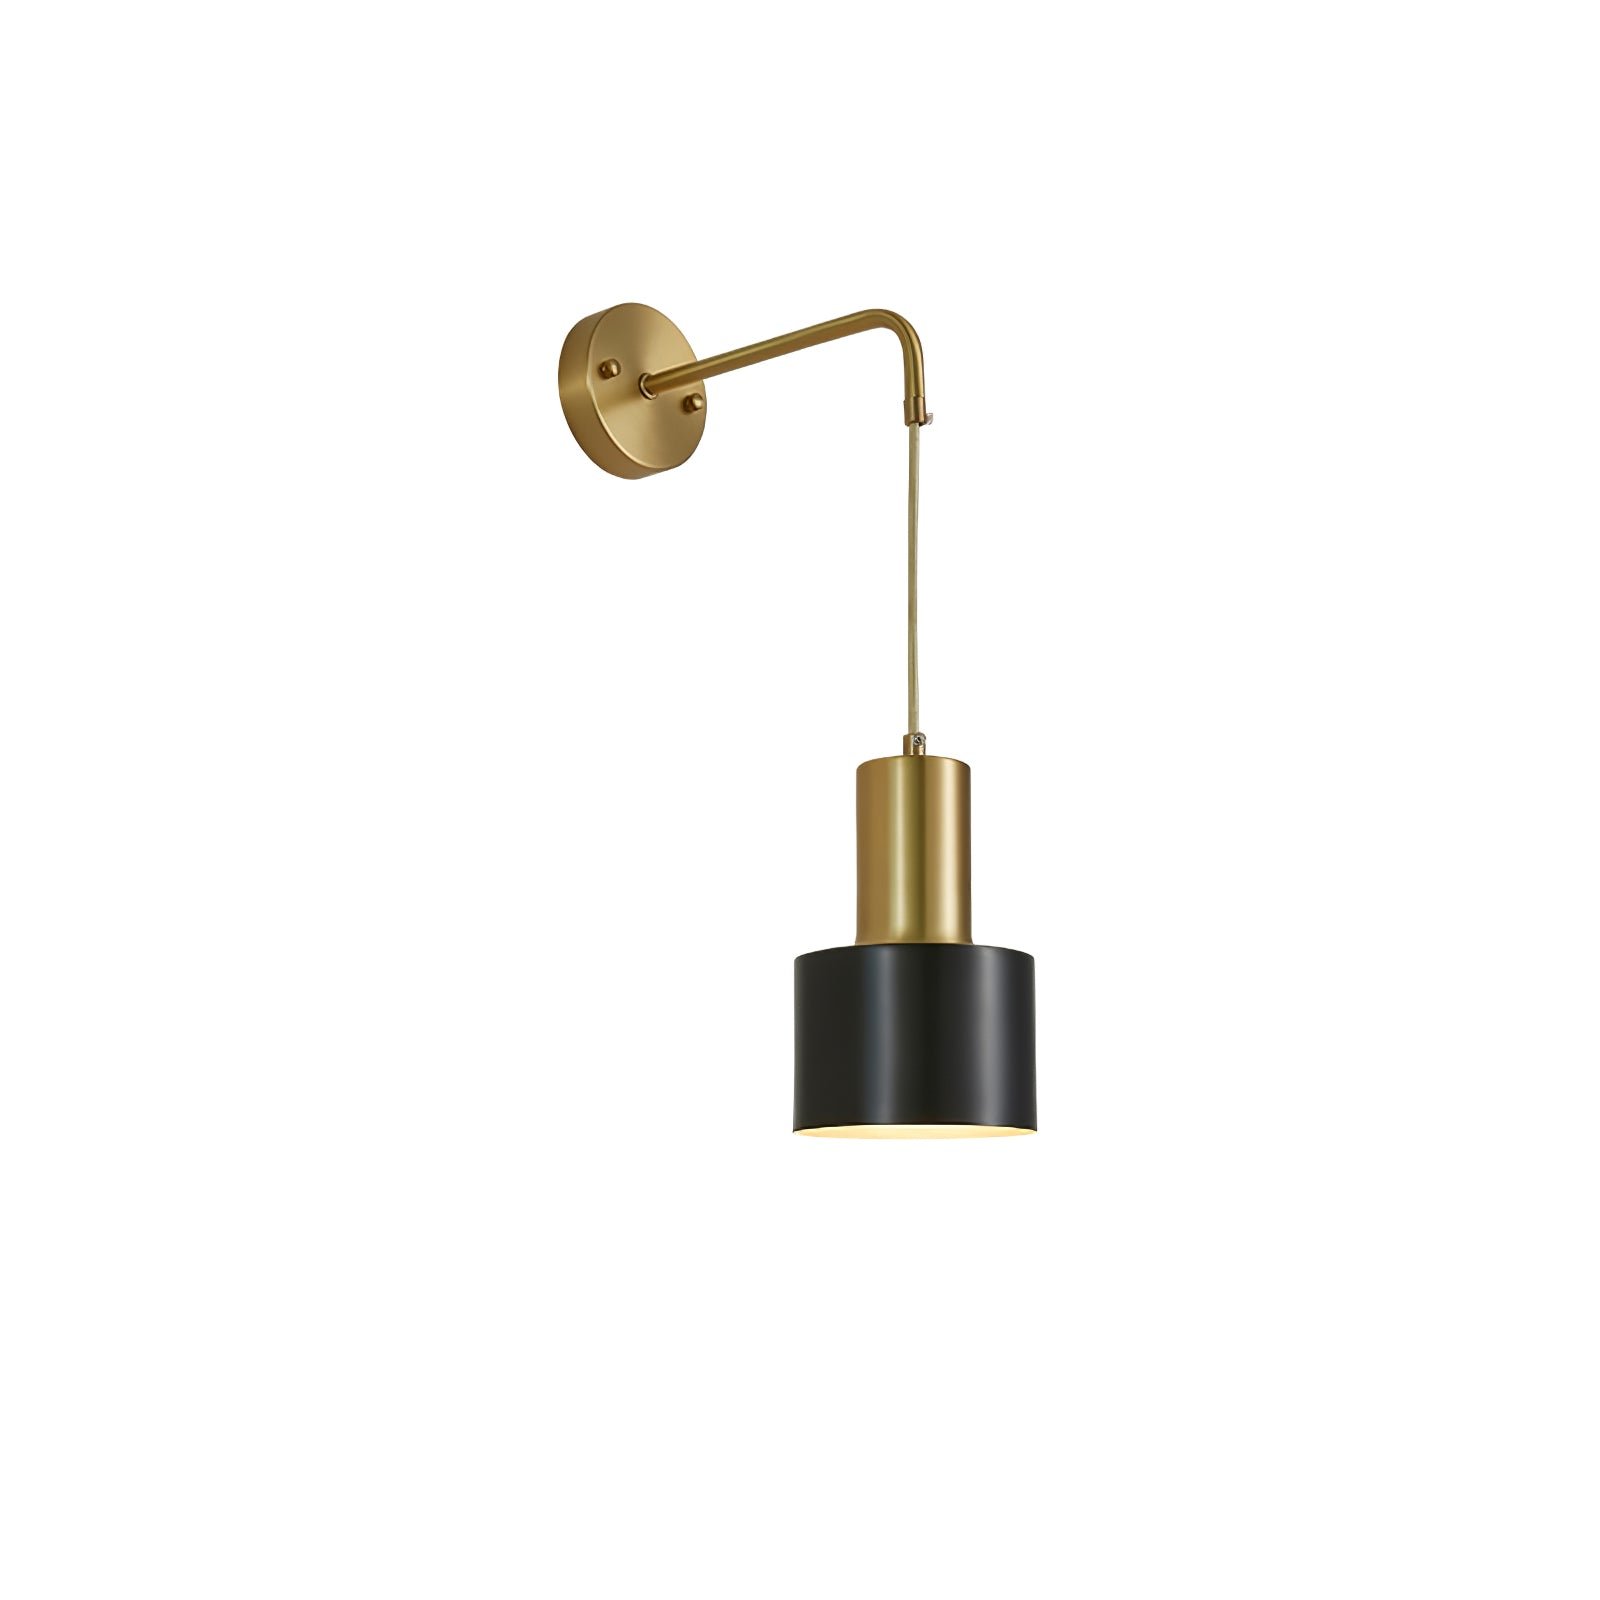 Black and Brass Pino Single Wall Lamp Set, Pack of 2.